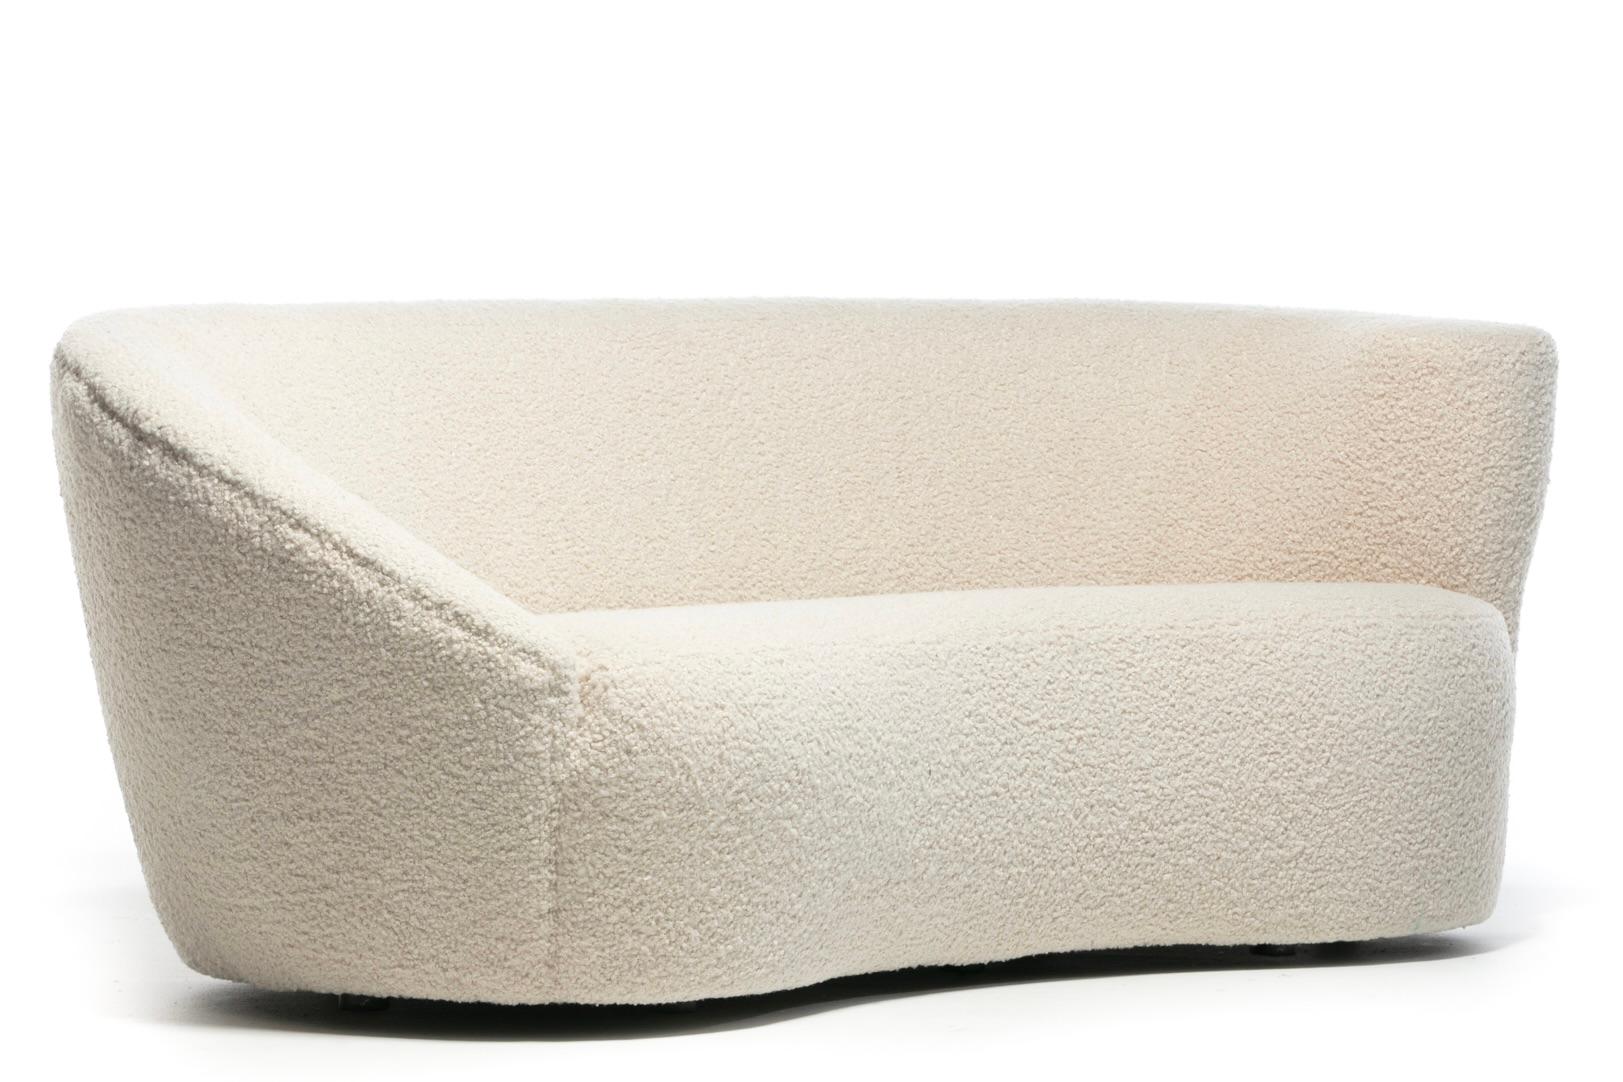 Late 20th Century Vladimir Kagan Nautilus Sofa in Ivory White Bouclé by Directional, c. 1990 For Sale